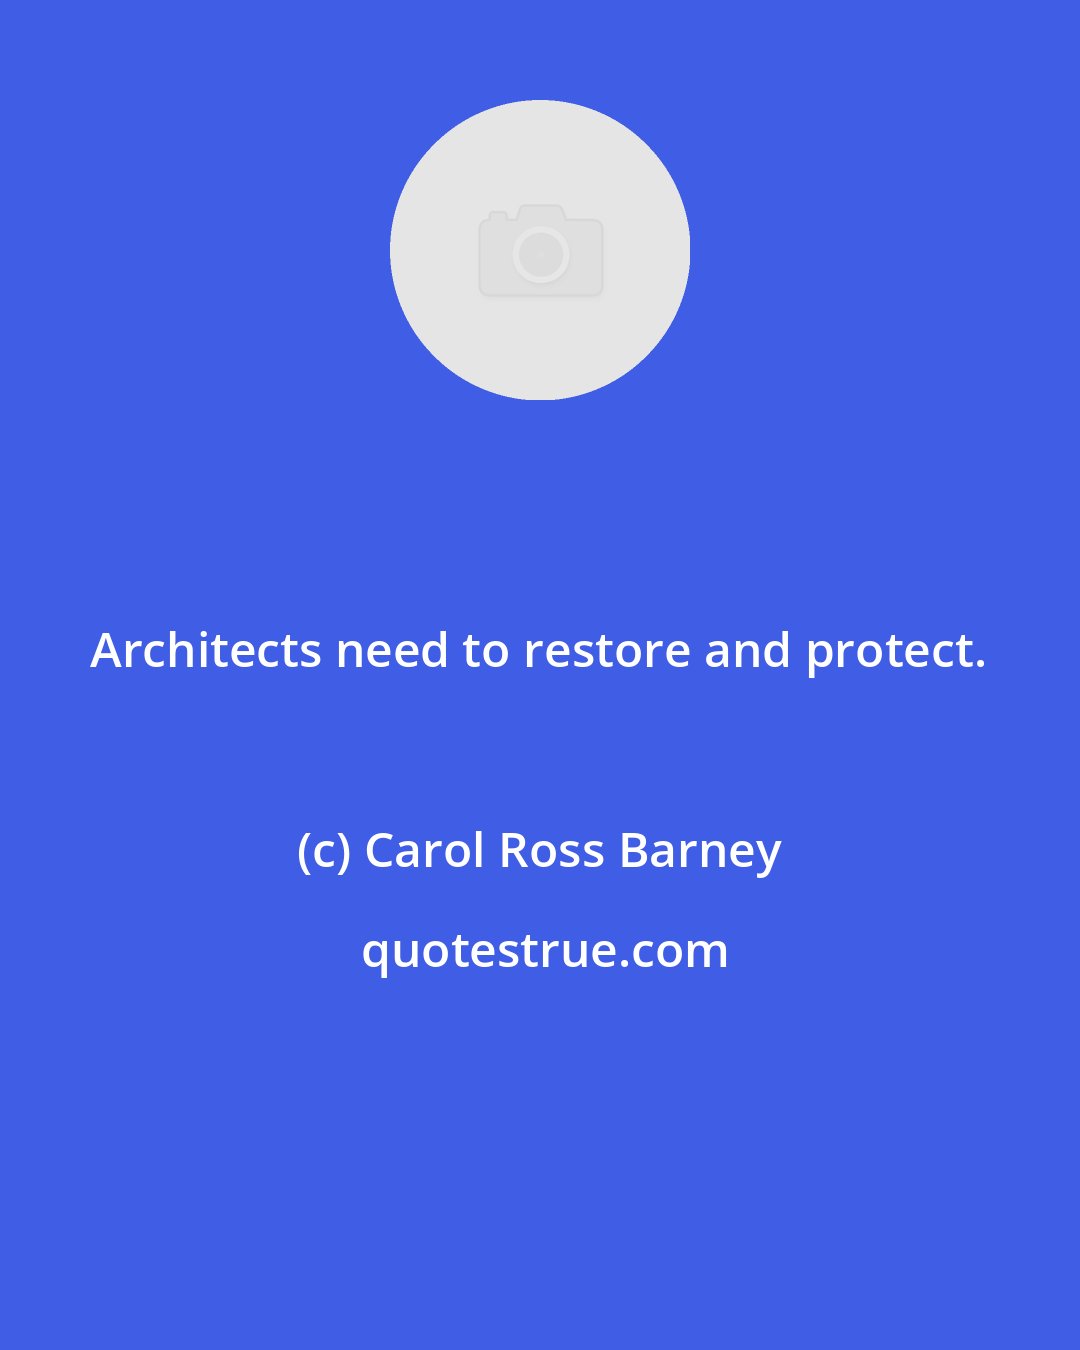 Carol Ross Barney: Architects need to restore and protect.